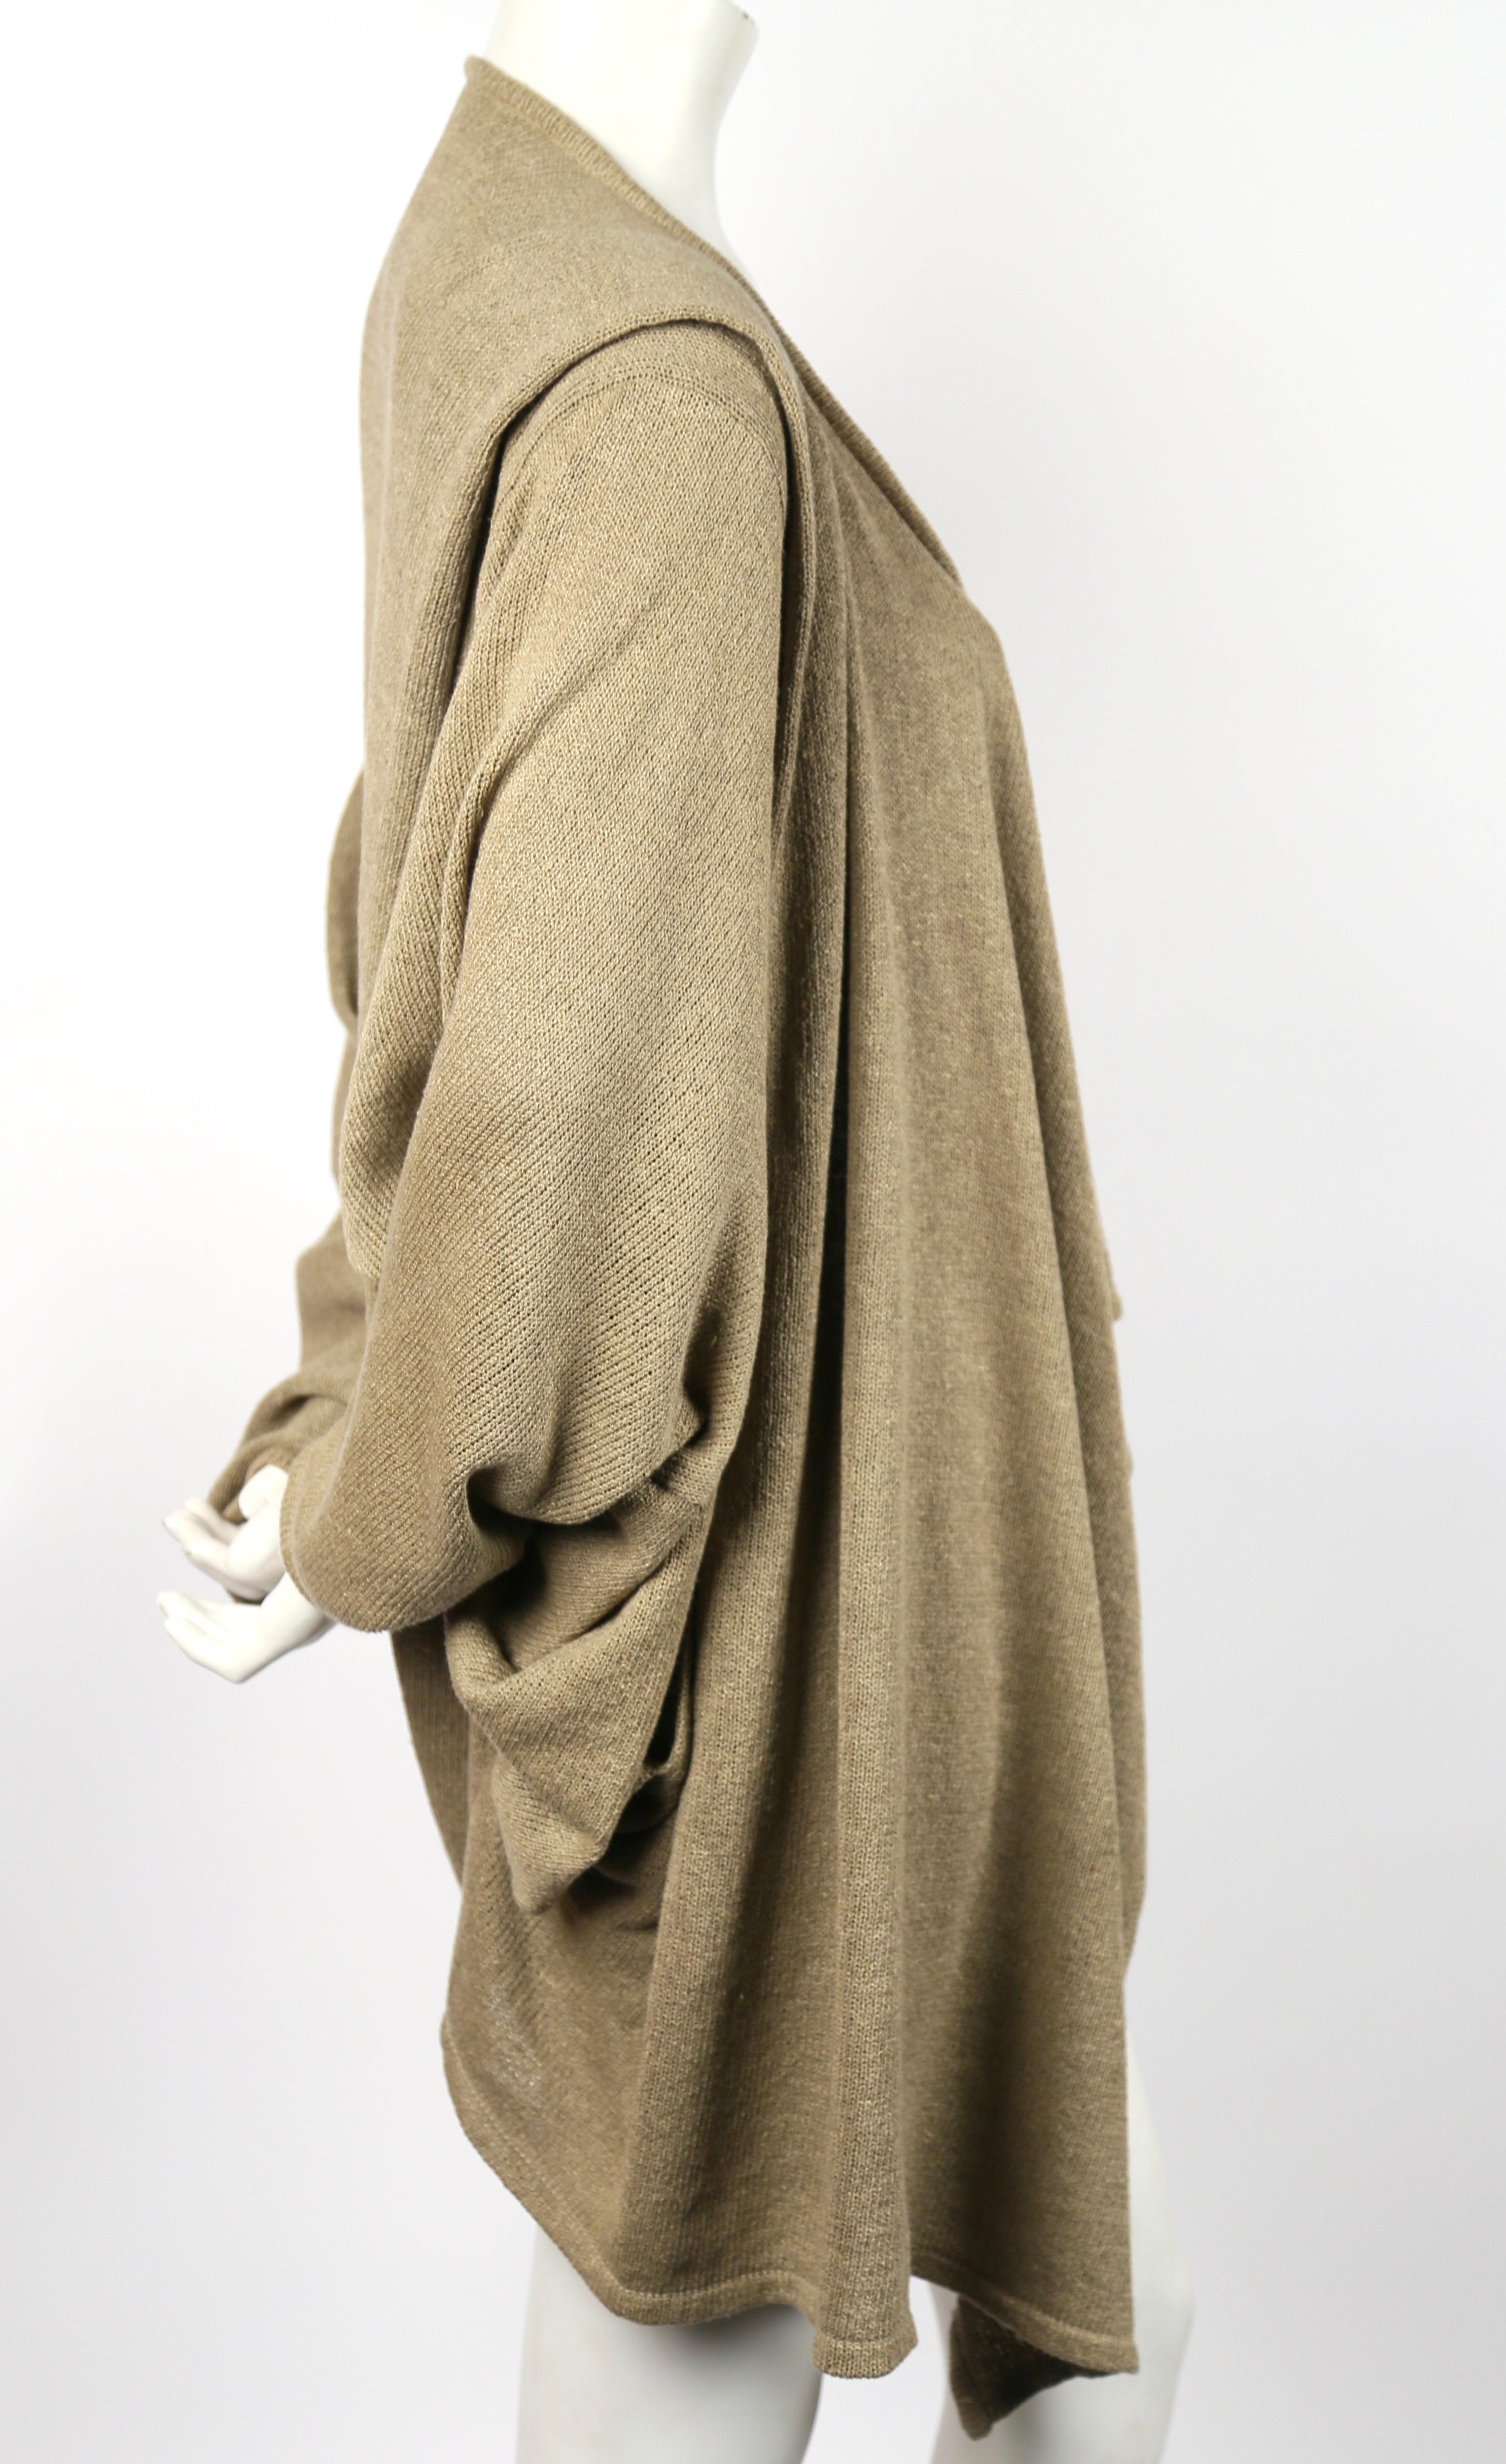 Draped tan cardigan jacket designed by Issey Miyake dating to the 1980's. Fits most sizes due to the oversized cut. Length is approximately 40